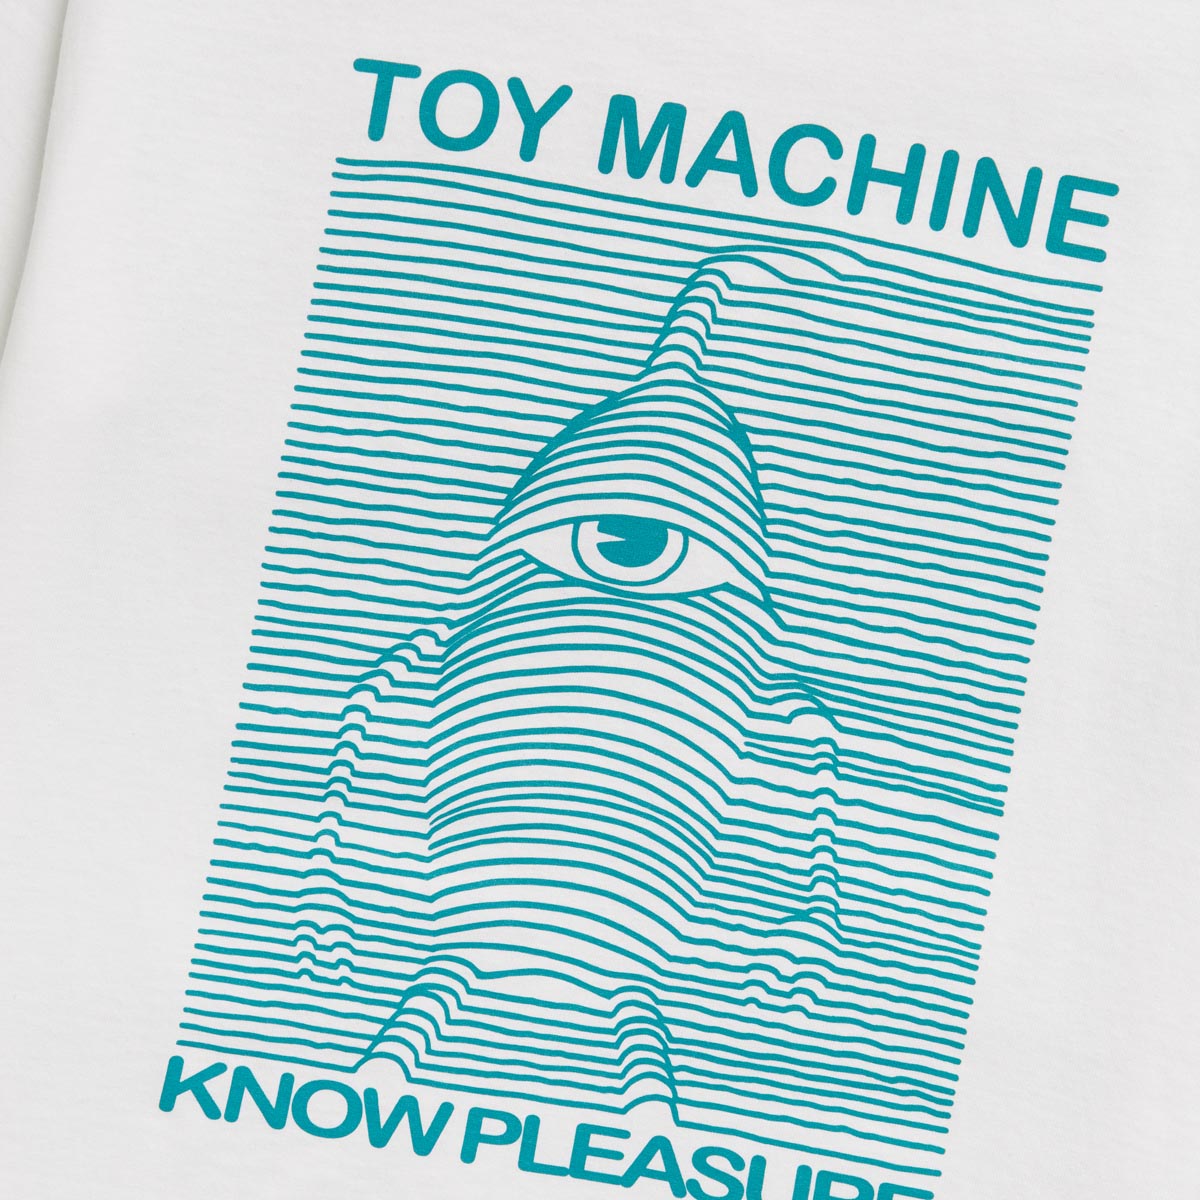 Toy Machine Toy Division T-Shirt - White image 2